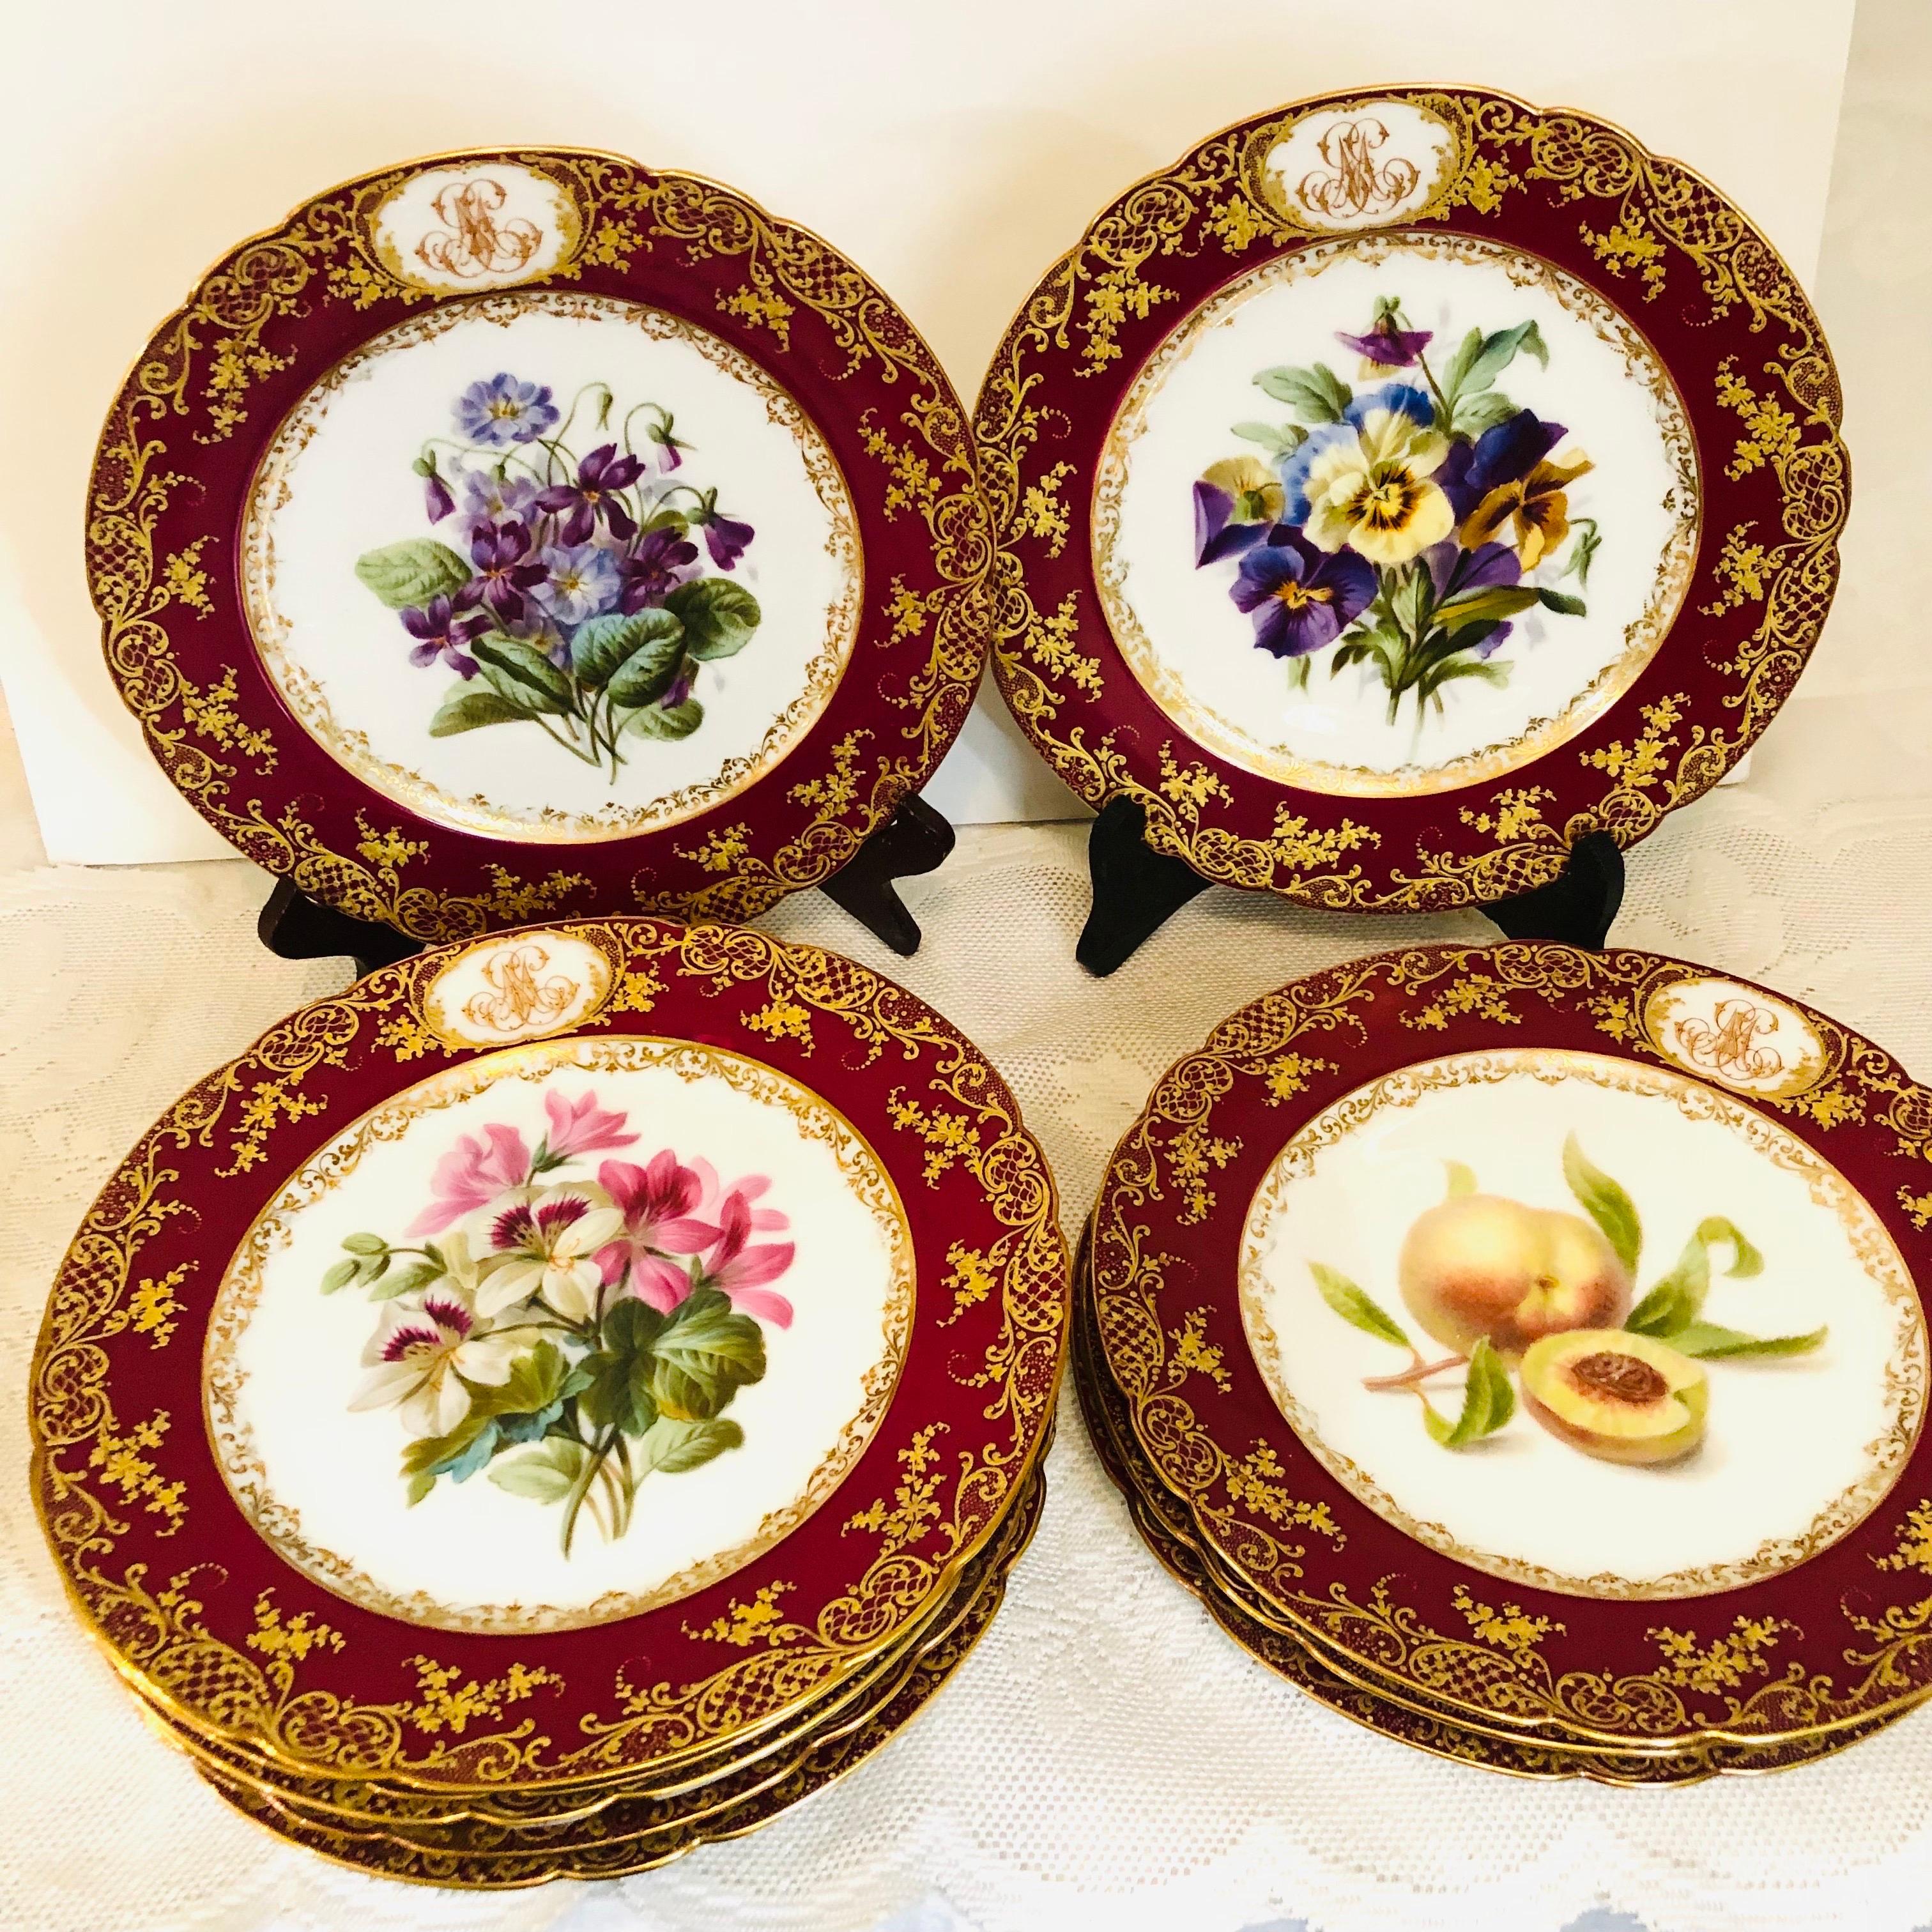 Rococo Ten Paris Porcelain Plates Each Painted with Different Flower Bouquets and Fruit For Sale